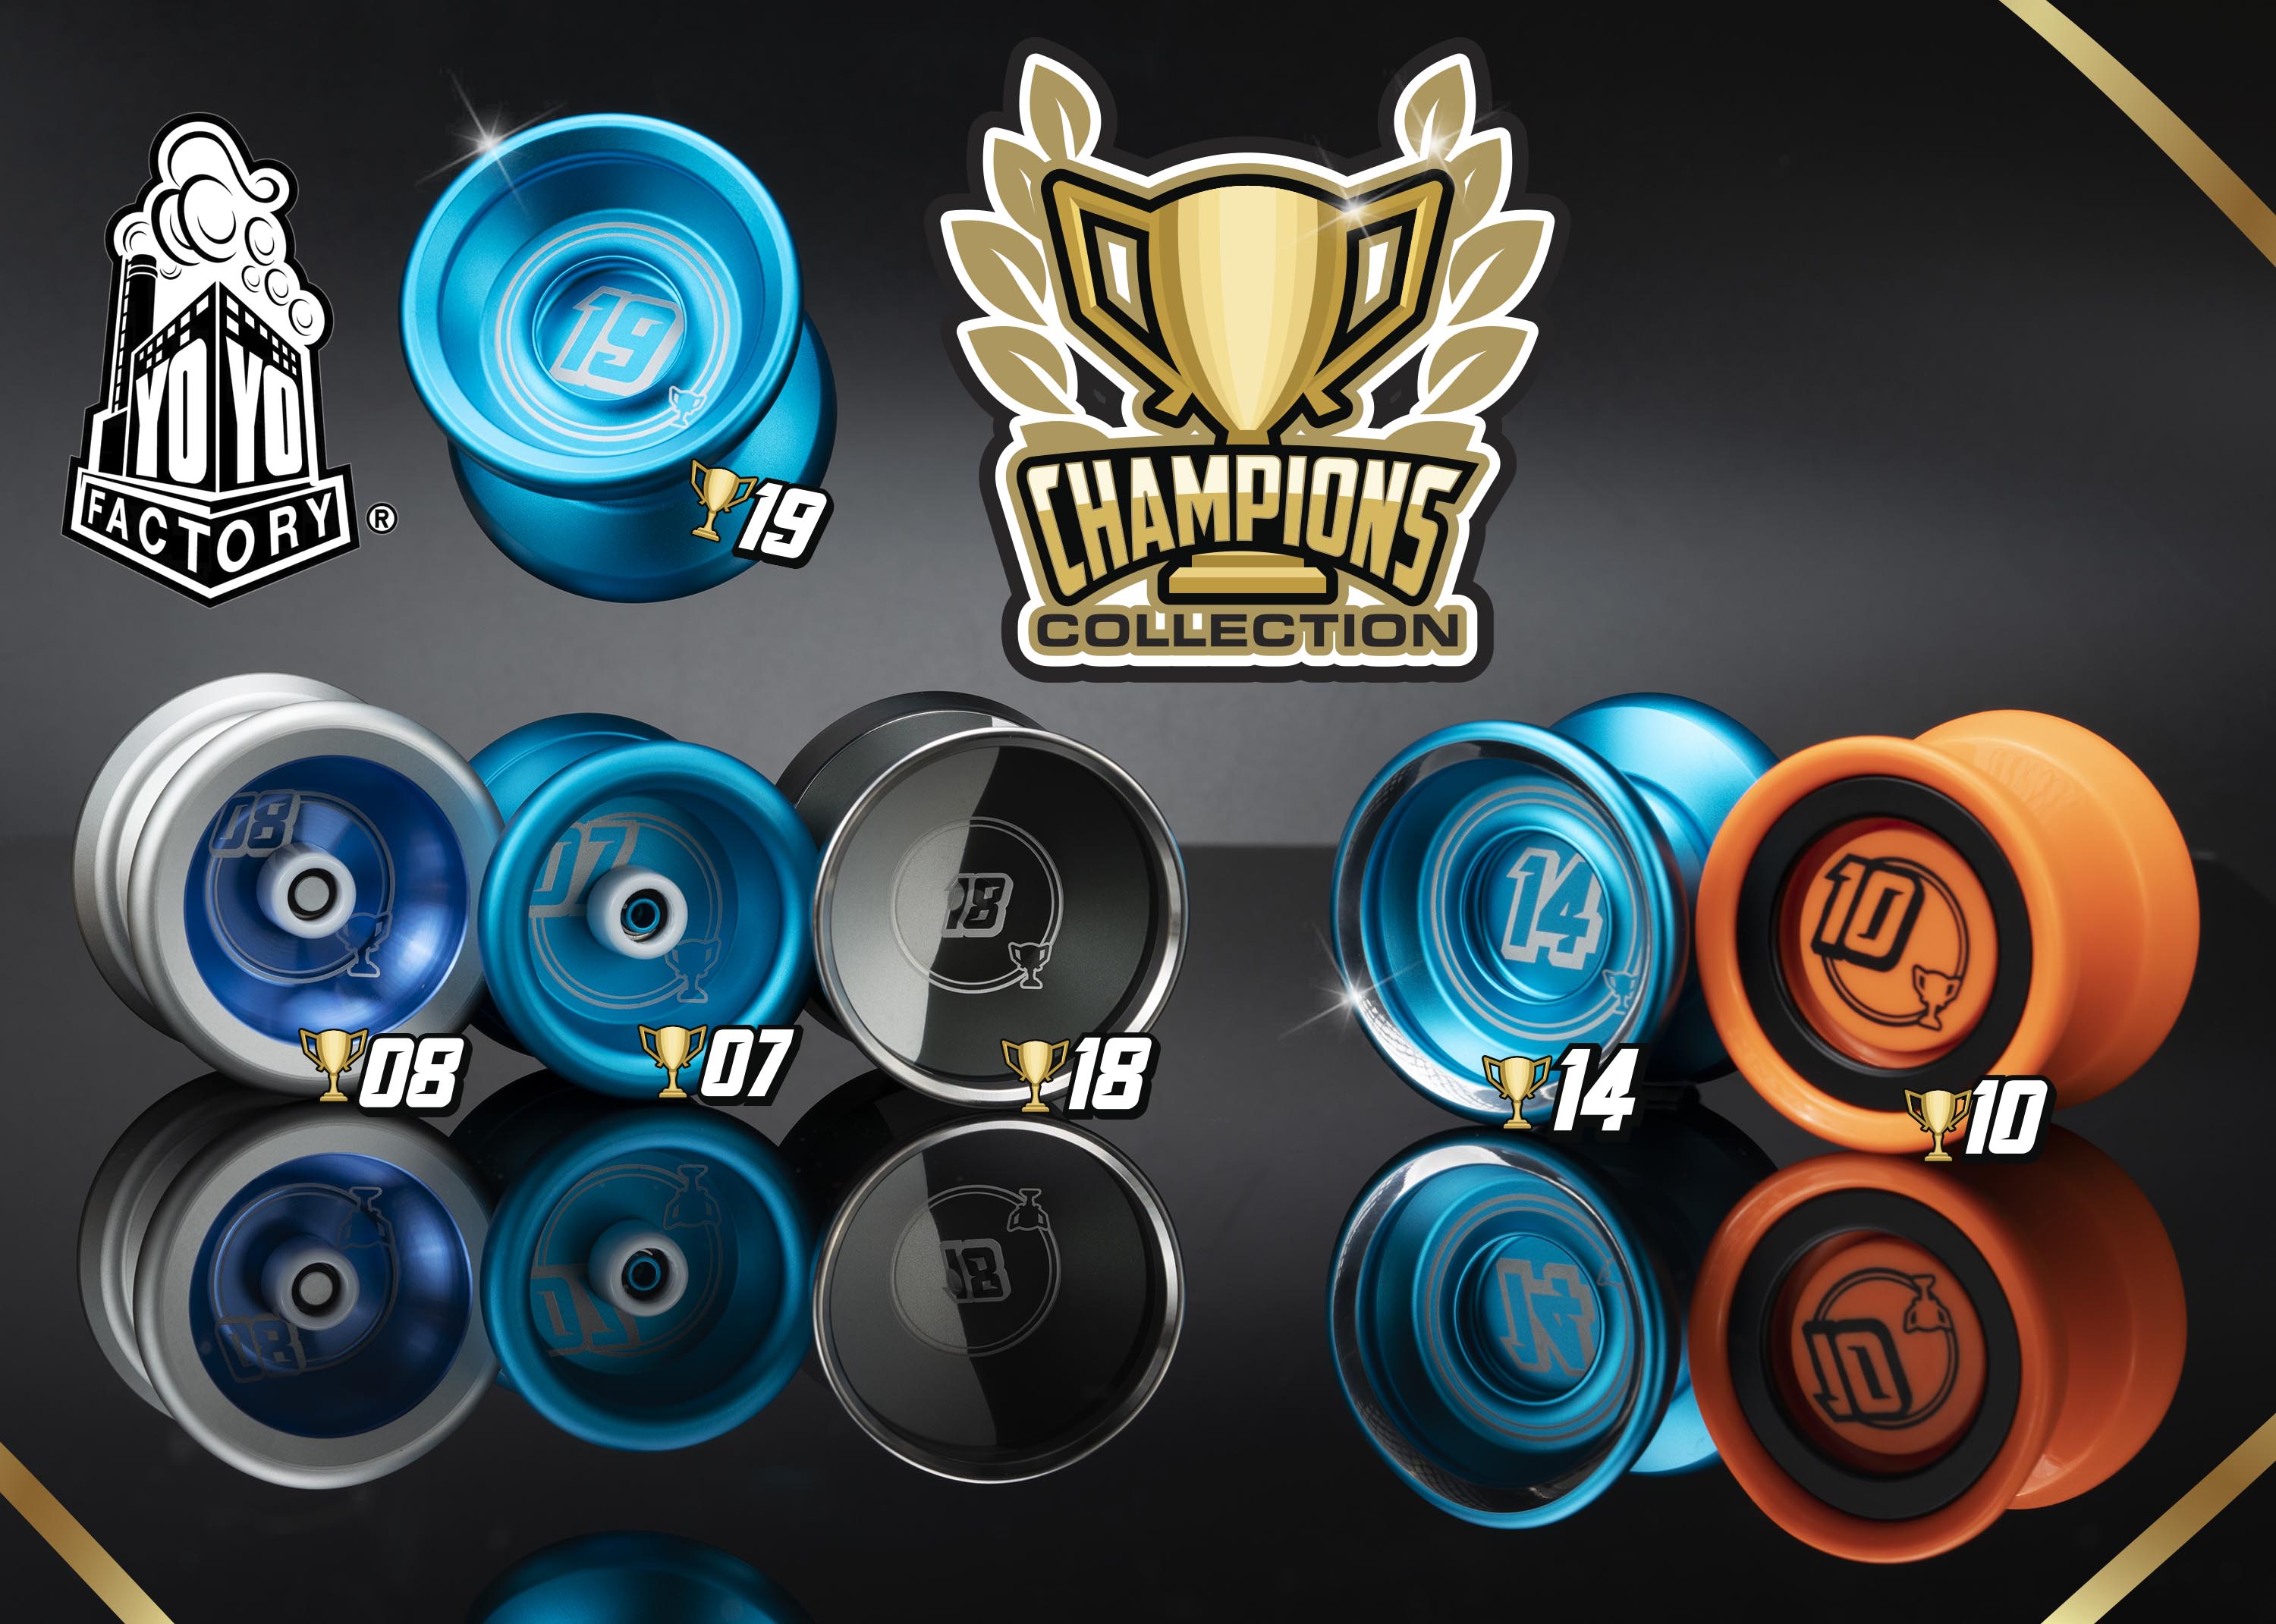 YYF Champions Collection by YoyoFactory!